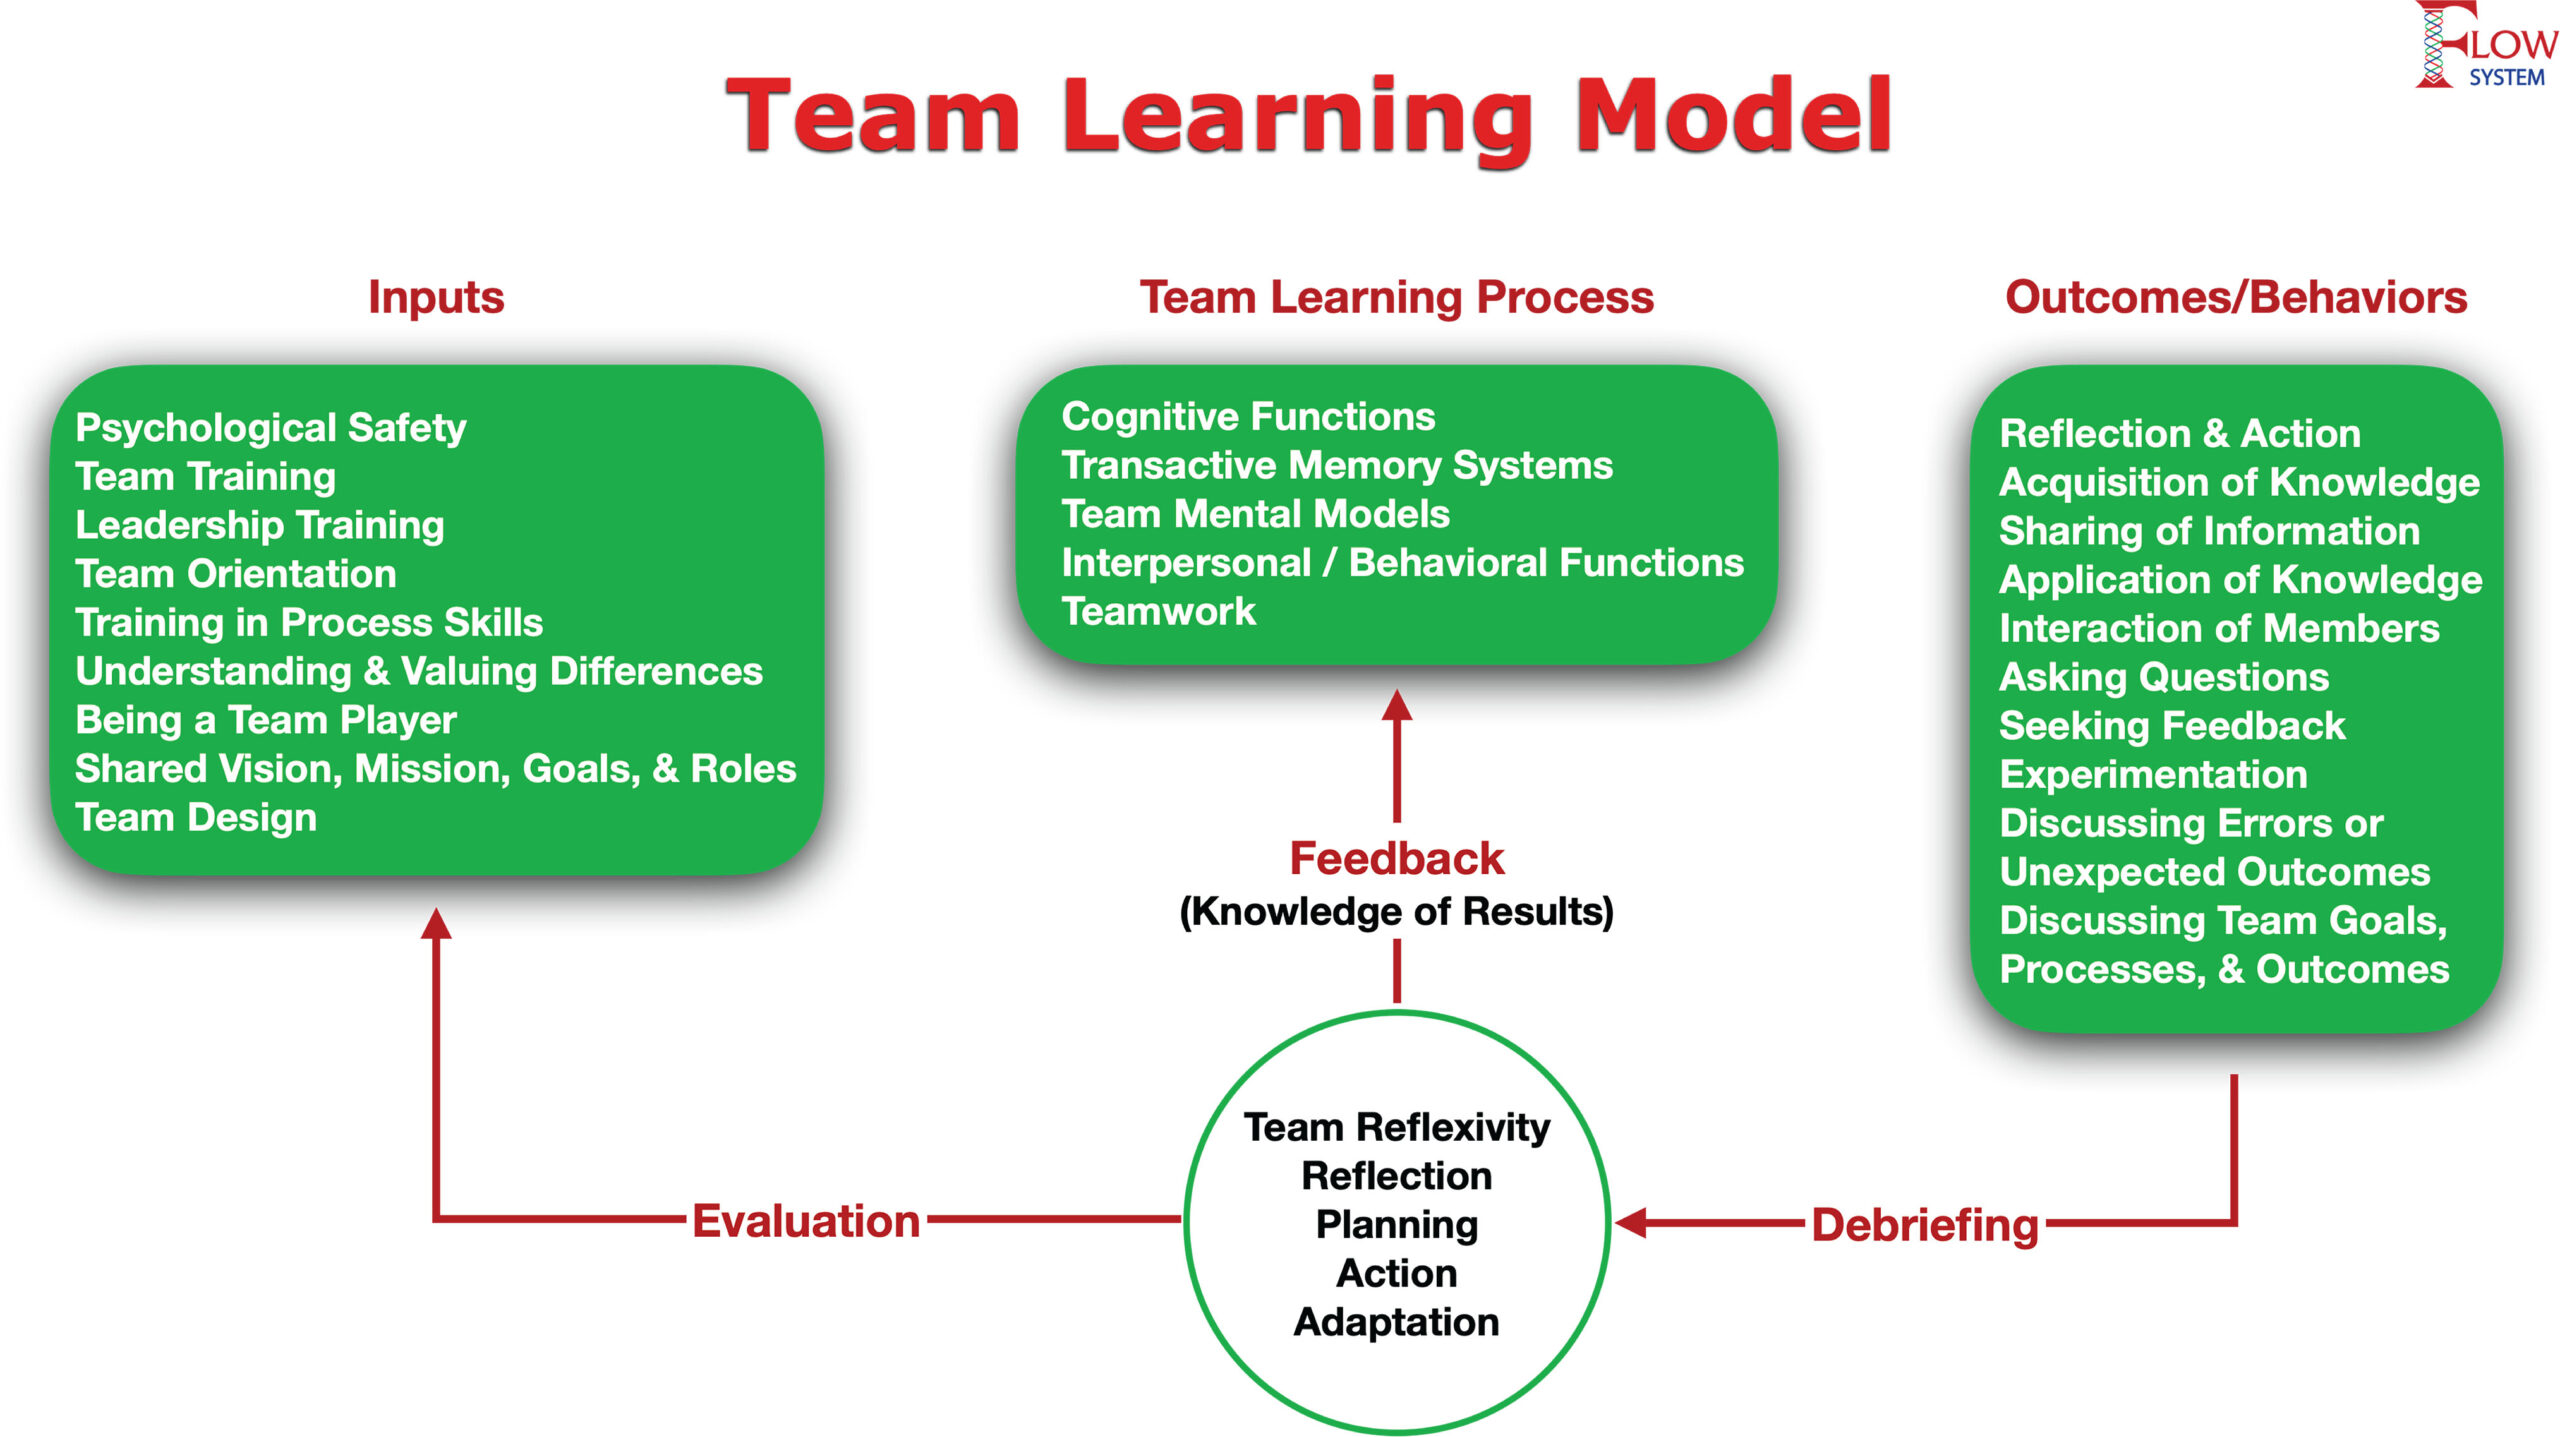 Figure of Team Learning Processes